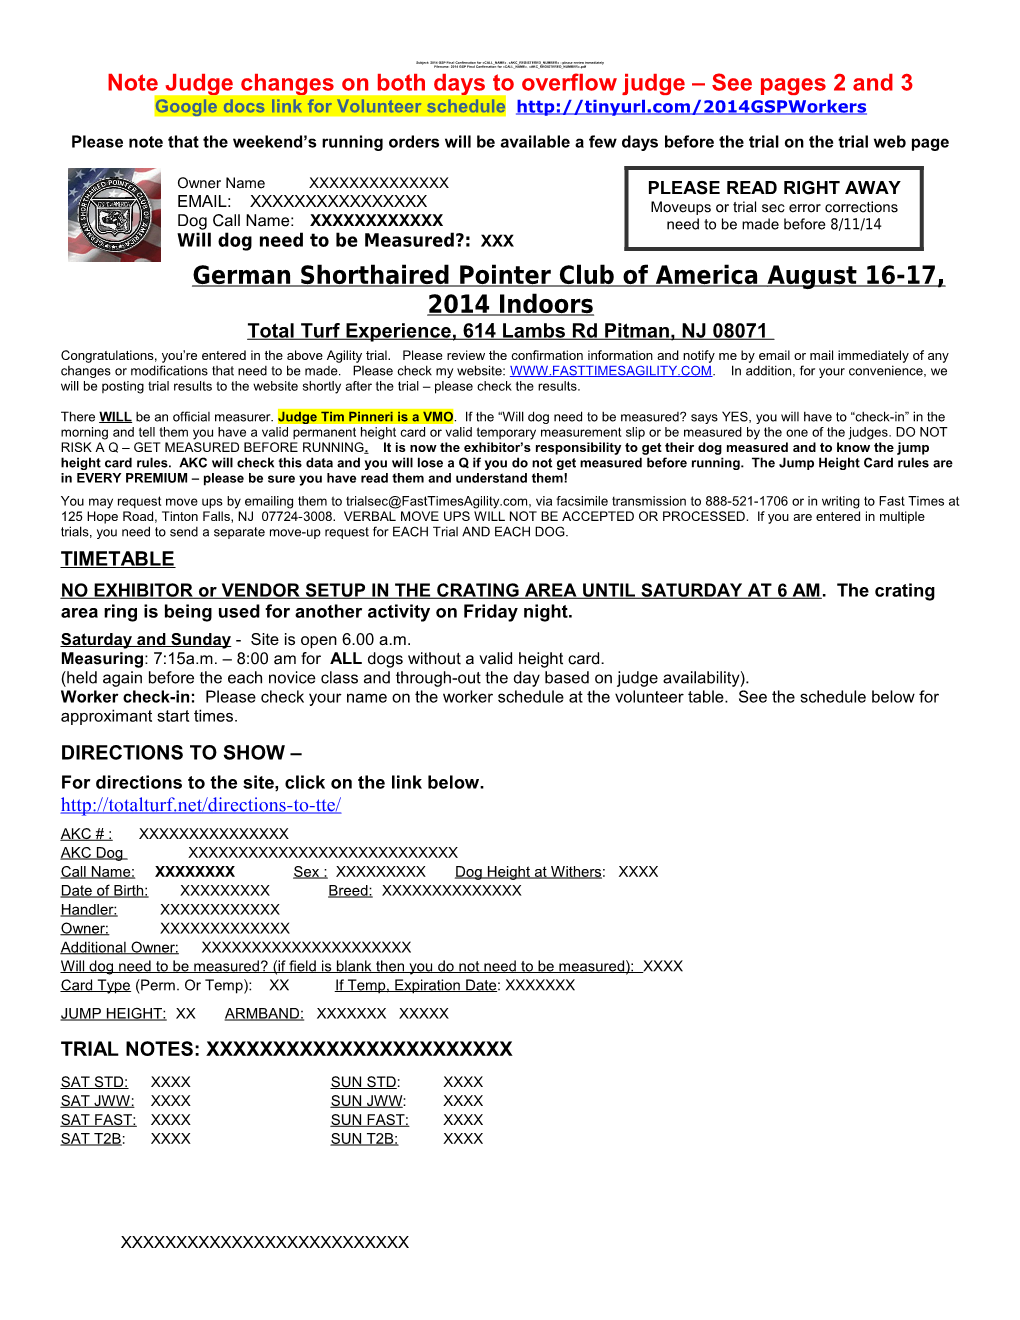 Filename: 2014 GSP Final Confirmation for CALL NAME , AKC REGISTERED NUMBER .Pdf